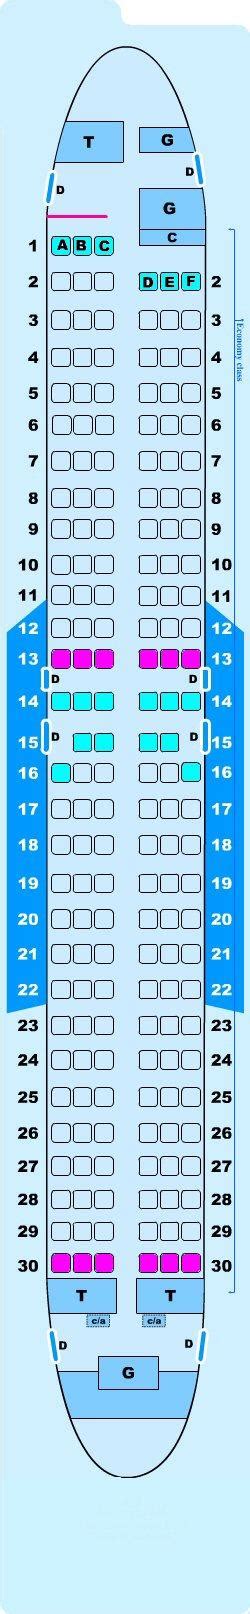 B737 800 seat map. Malaysia Airlines operates two versions of the Boeing 737-800: one version with 150 Economy Class seats and a second version with 144 Economy Class seats. This version operates on short-haul flights with 16 seats of Business Class and 150 seats of Economy Class. Business Class: Meal tray table conveniently stowed in the armrest. Cocktail tables ... 